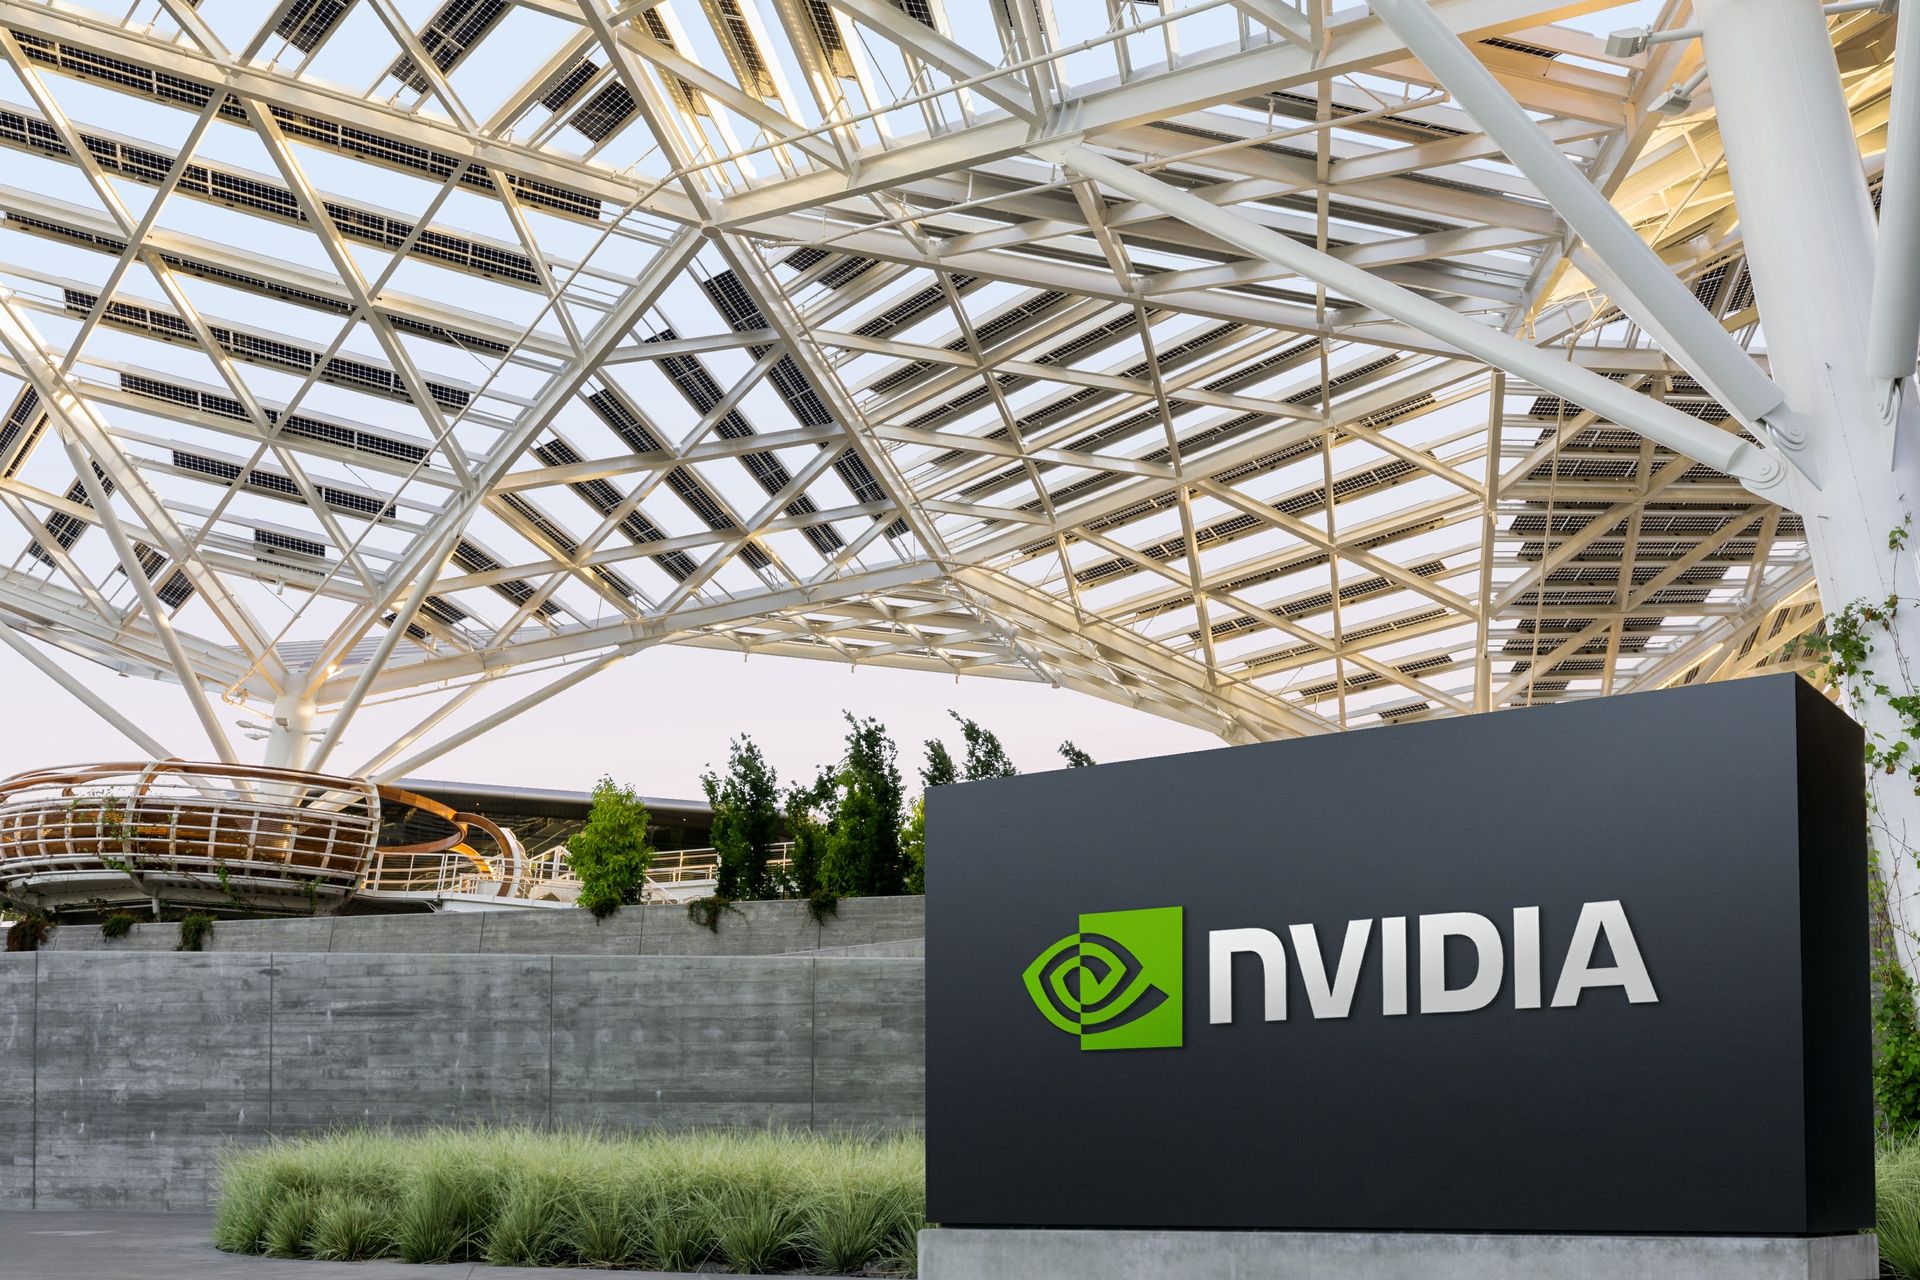 Tata Group partners with NVIDIA to build AI infrastructure